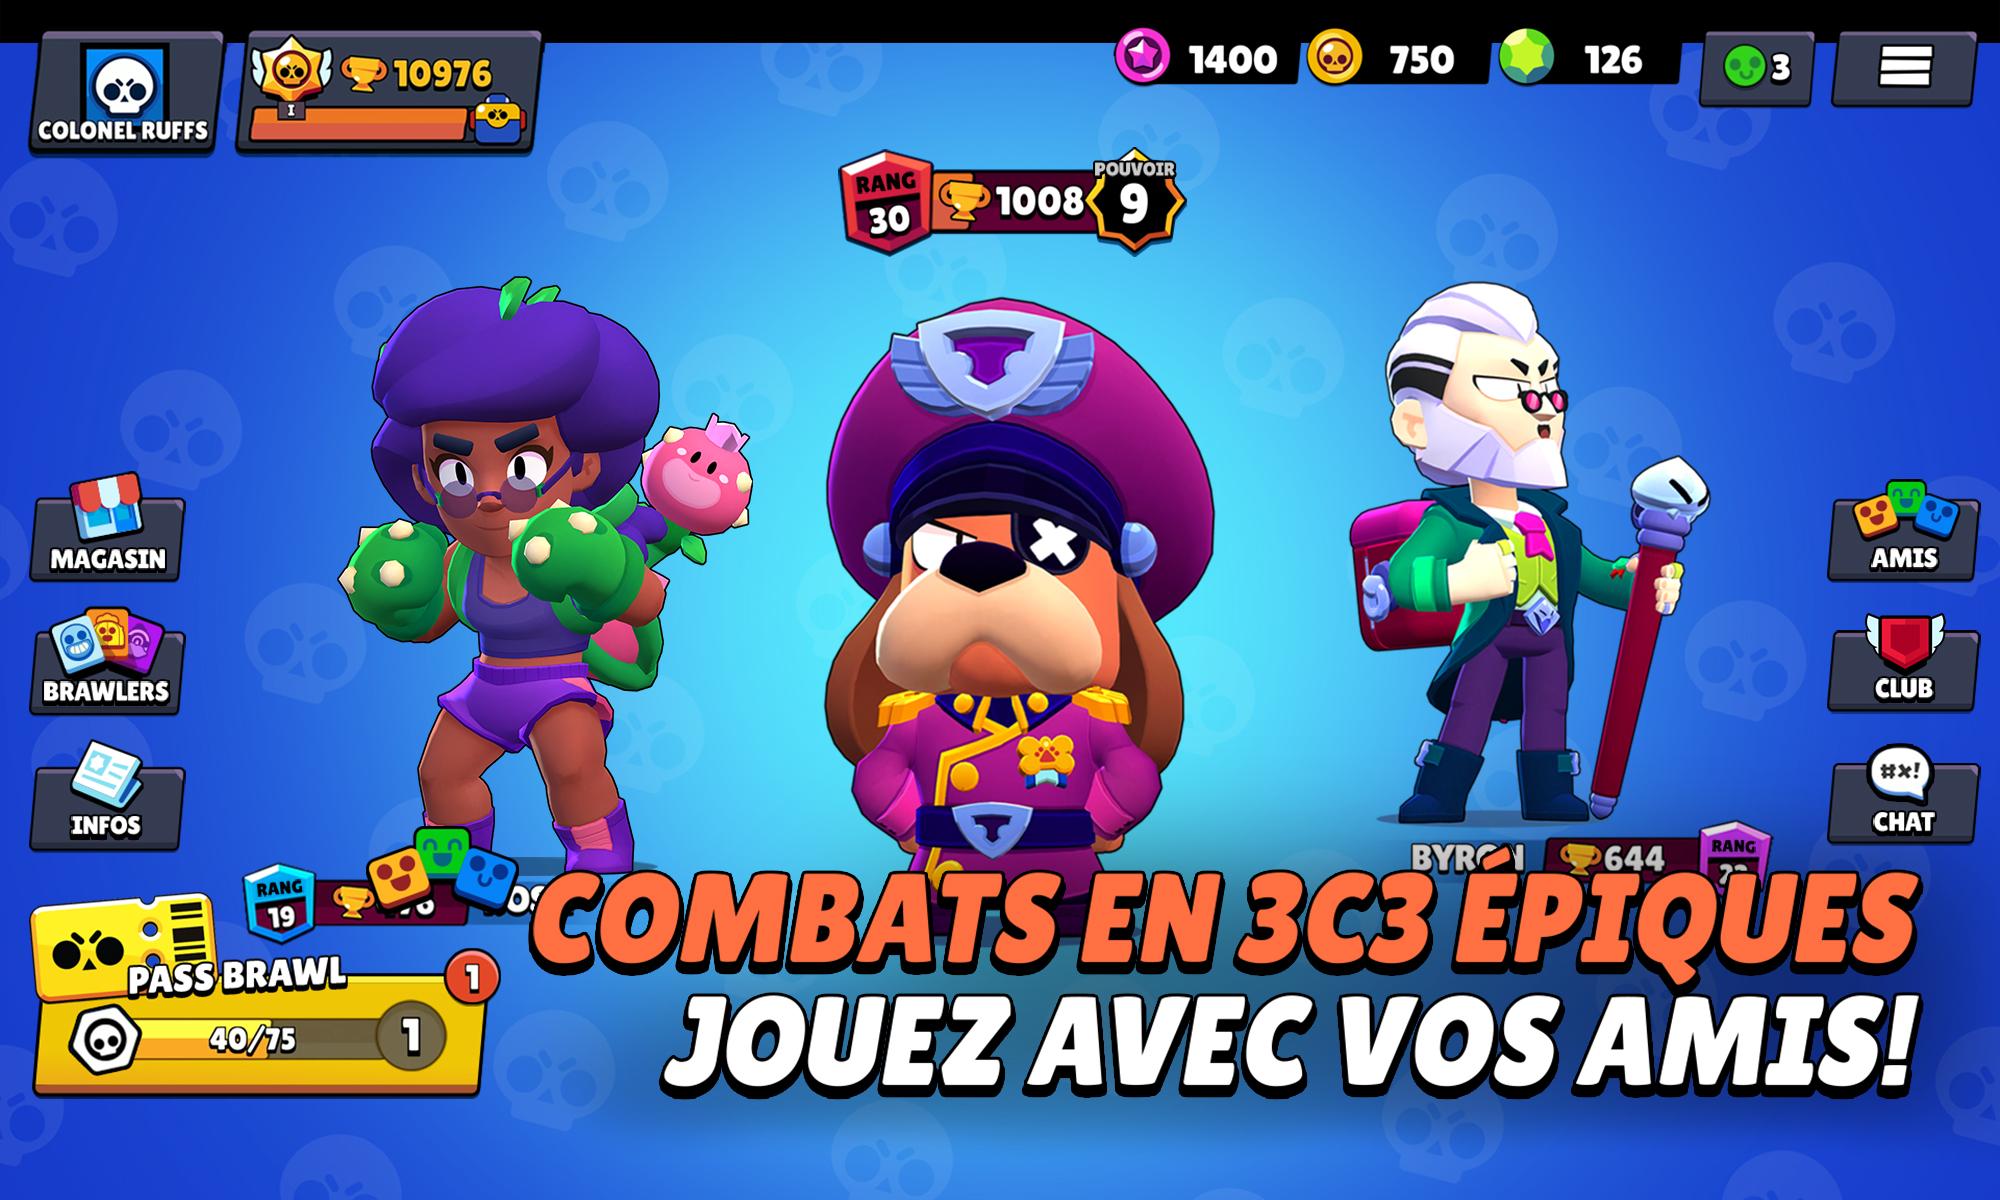 Brawl Stars Apk Download Pick Up Your Hero Characters In 3v3 Smash And Grab Mode Brock Shelly Jessie And Barley - quitter club brawl star